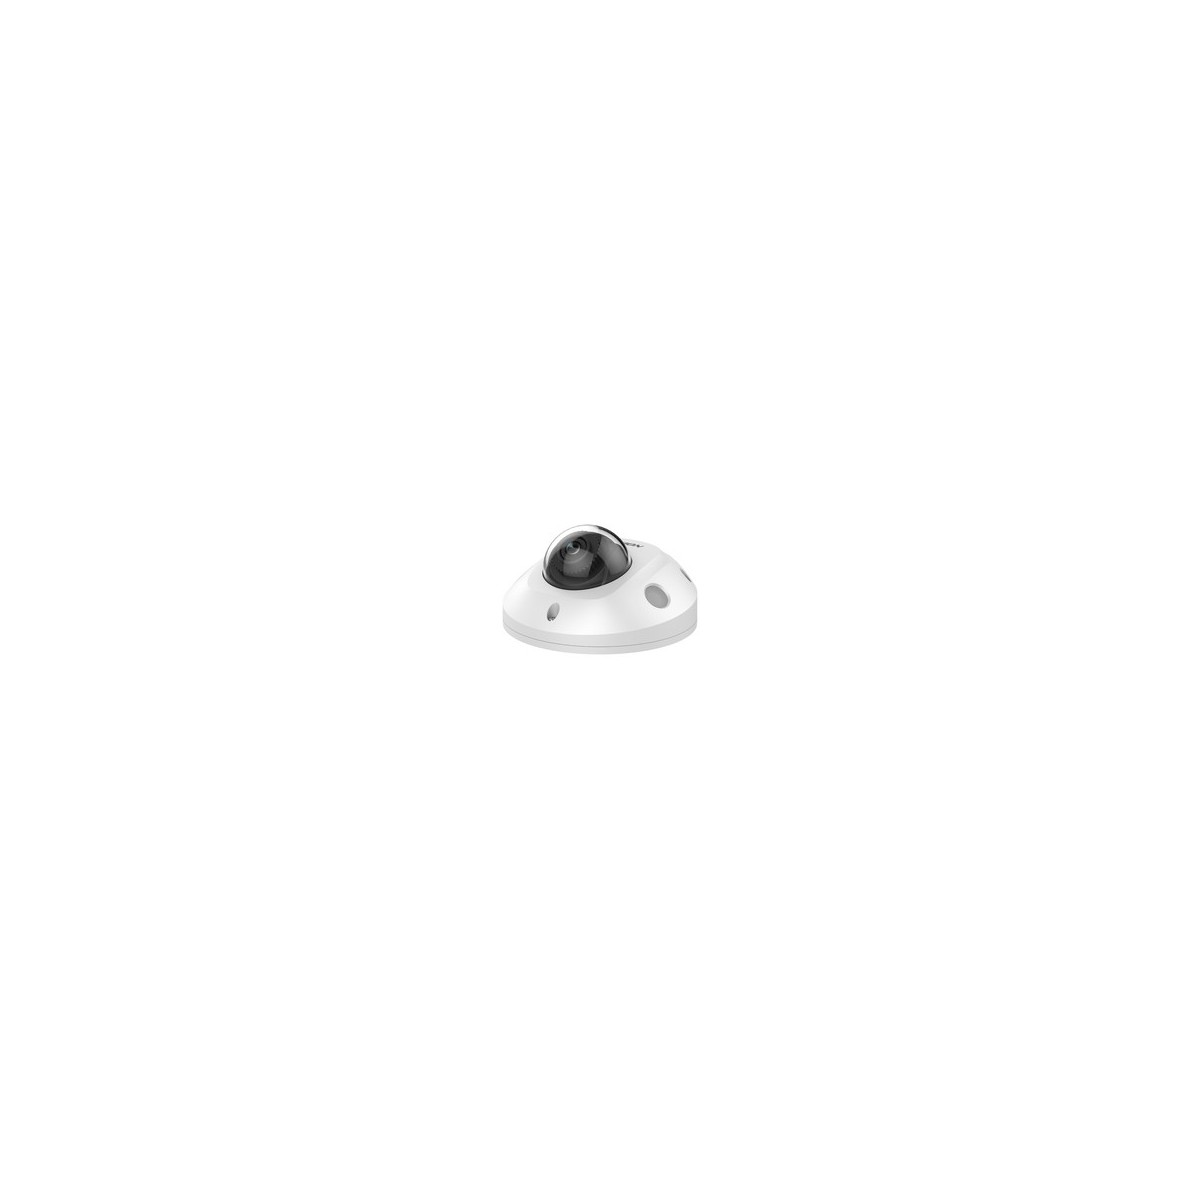 Hikvision Digital Technology DS-2CD2546G2-IWS - IP security camera - Outdoor - Wired - Ceiling-wall - White - Dome